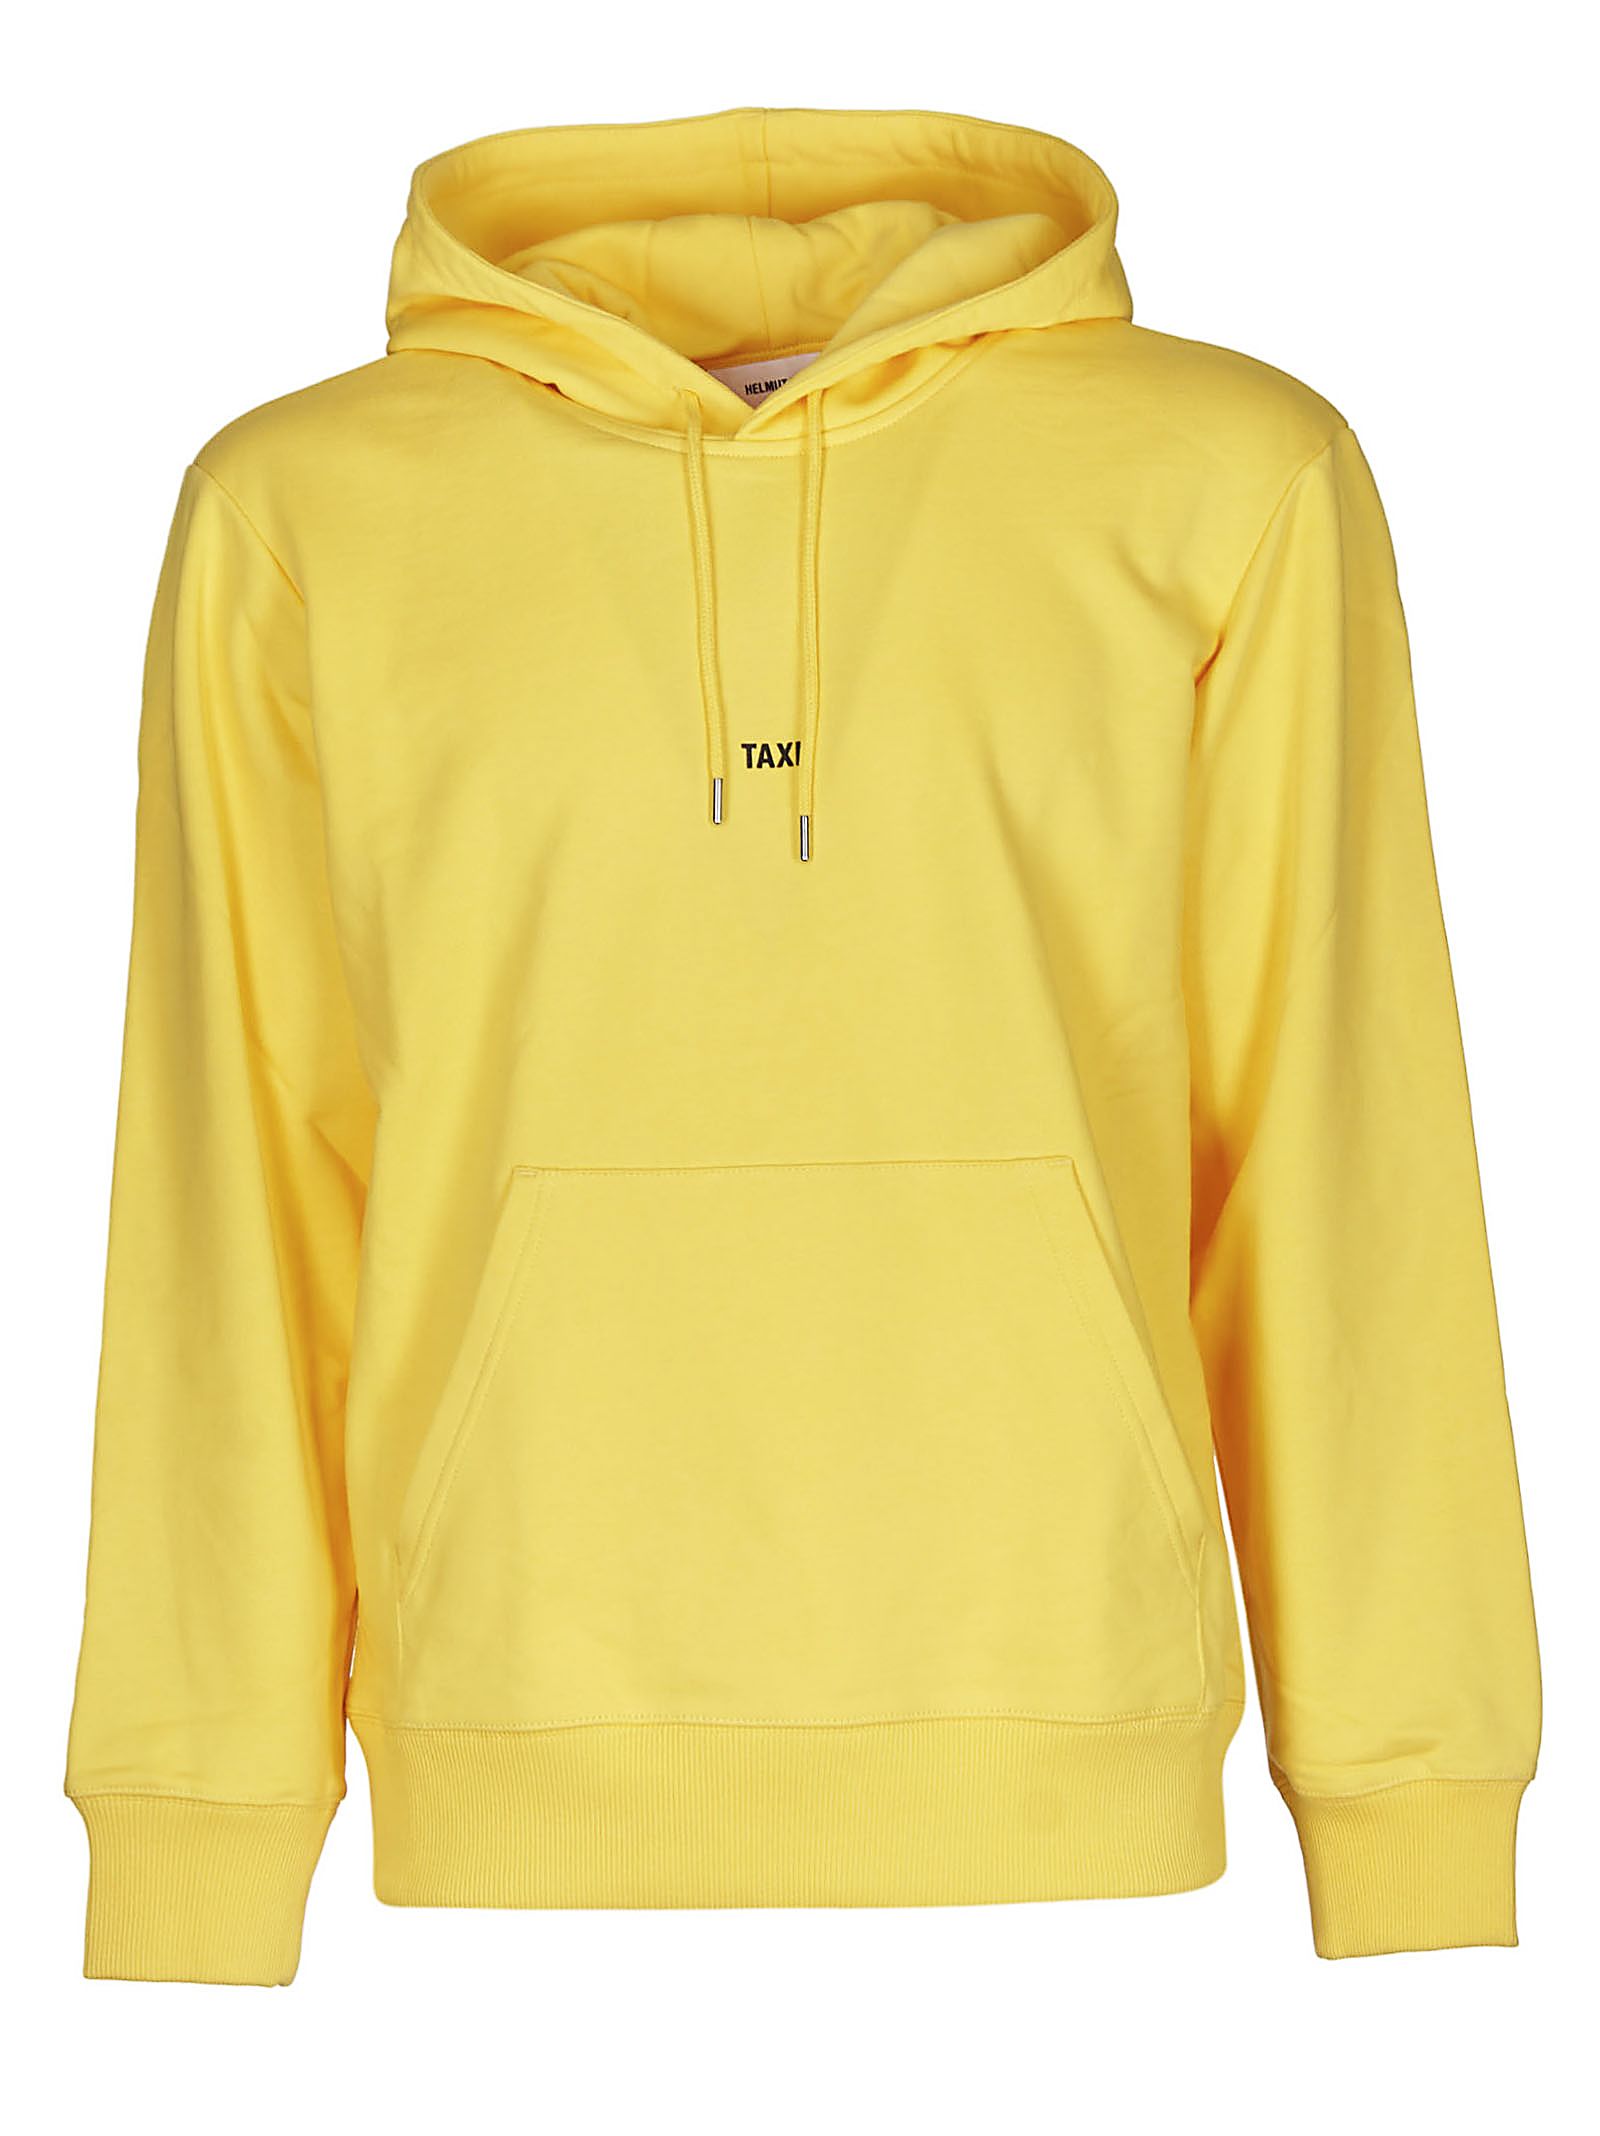 Helmut Lang Taxi Hoodie - Giallo - 10665728 | italist